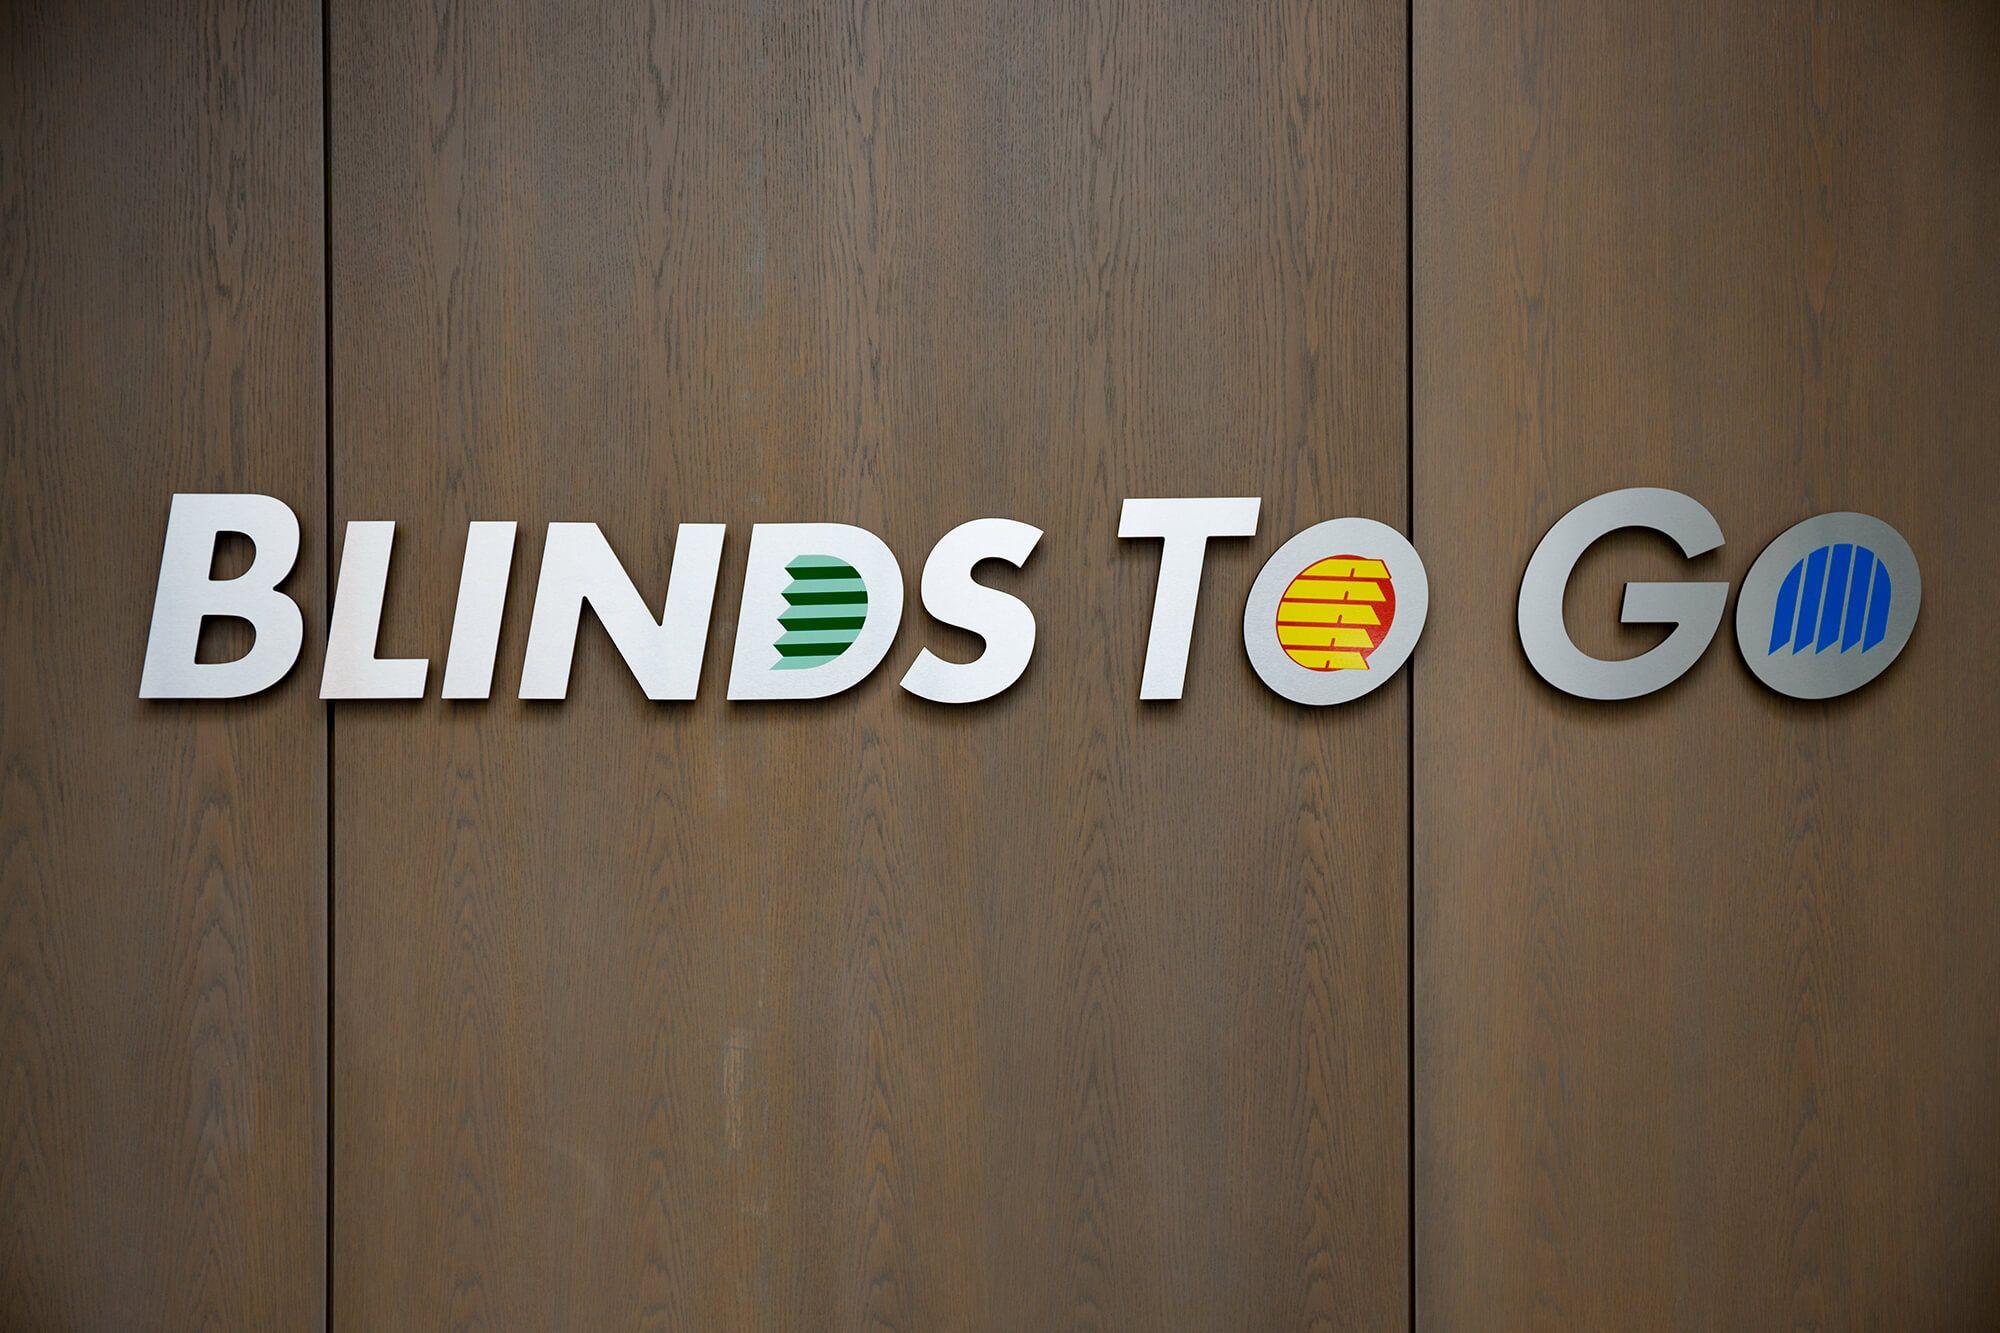 Blinds To Go logo on wooden background.